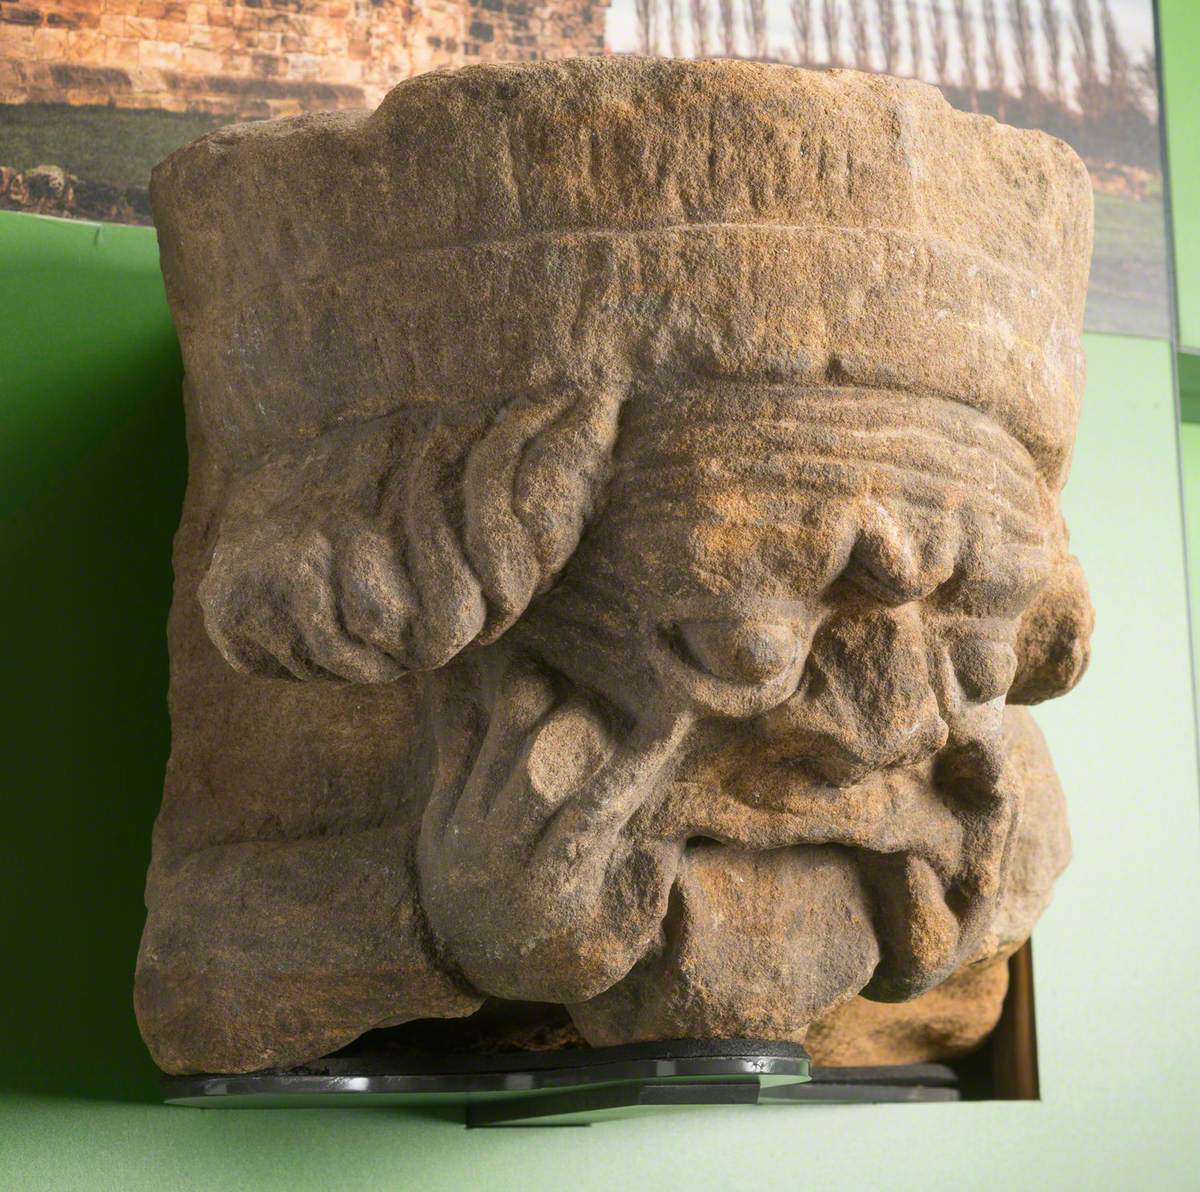 Sandstone Corbel Carved with Human Head with Fingers in the Corners of Mouth: Monk Bretton Priory